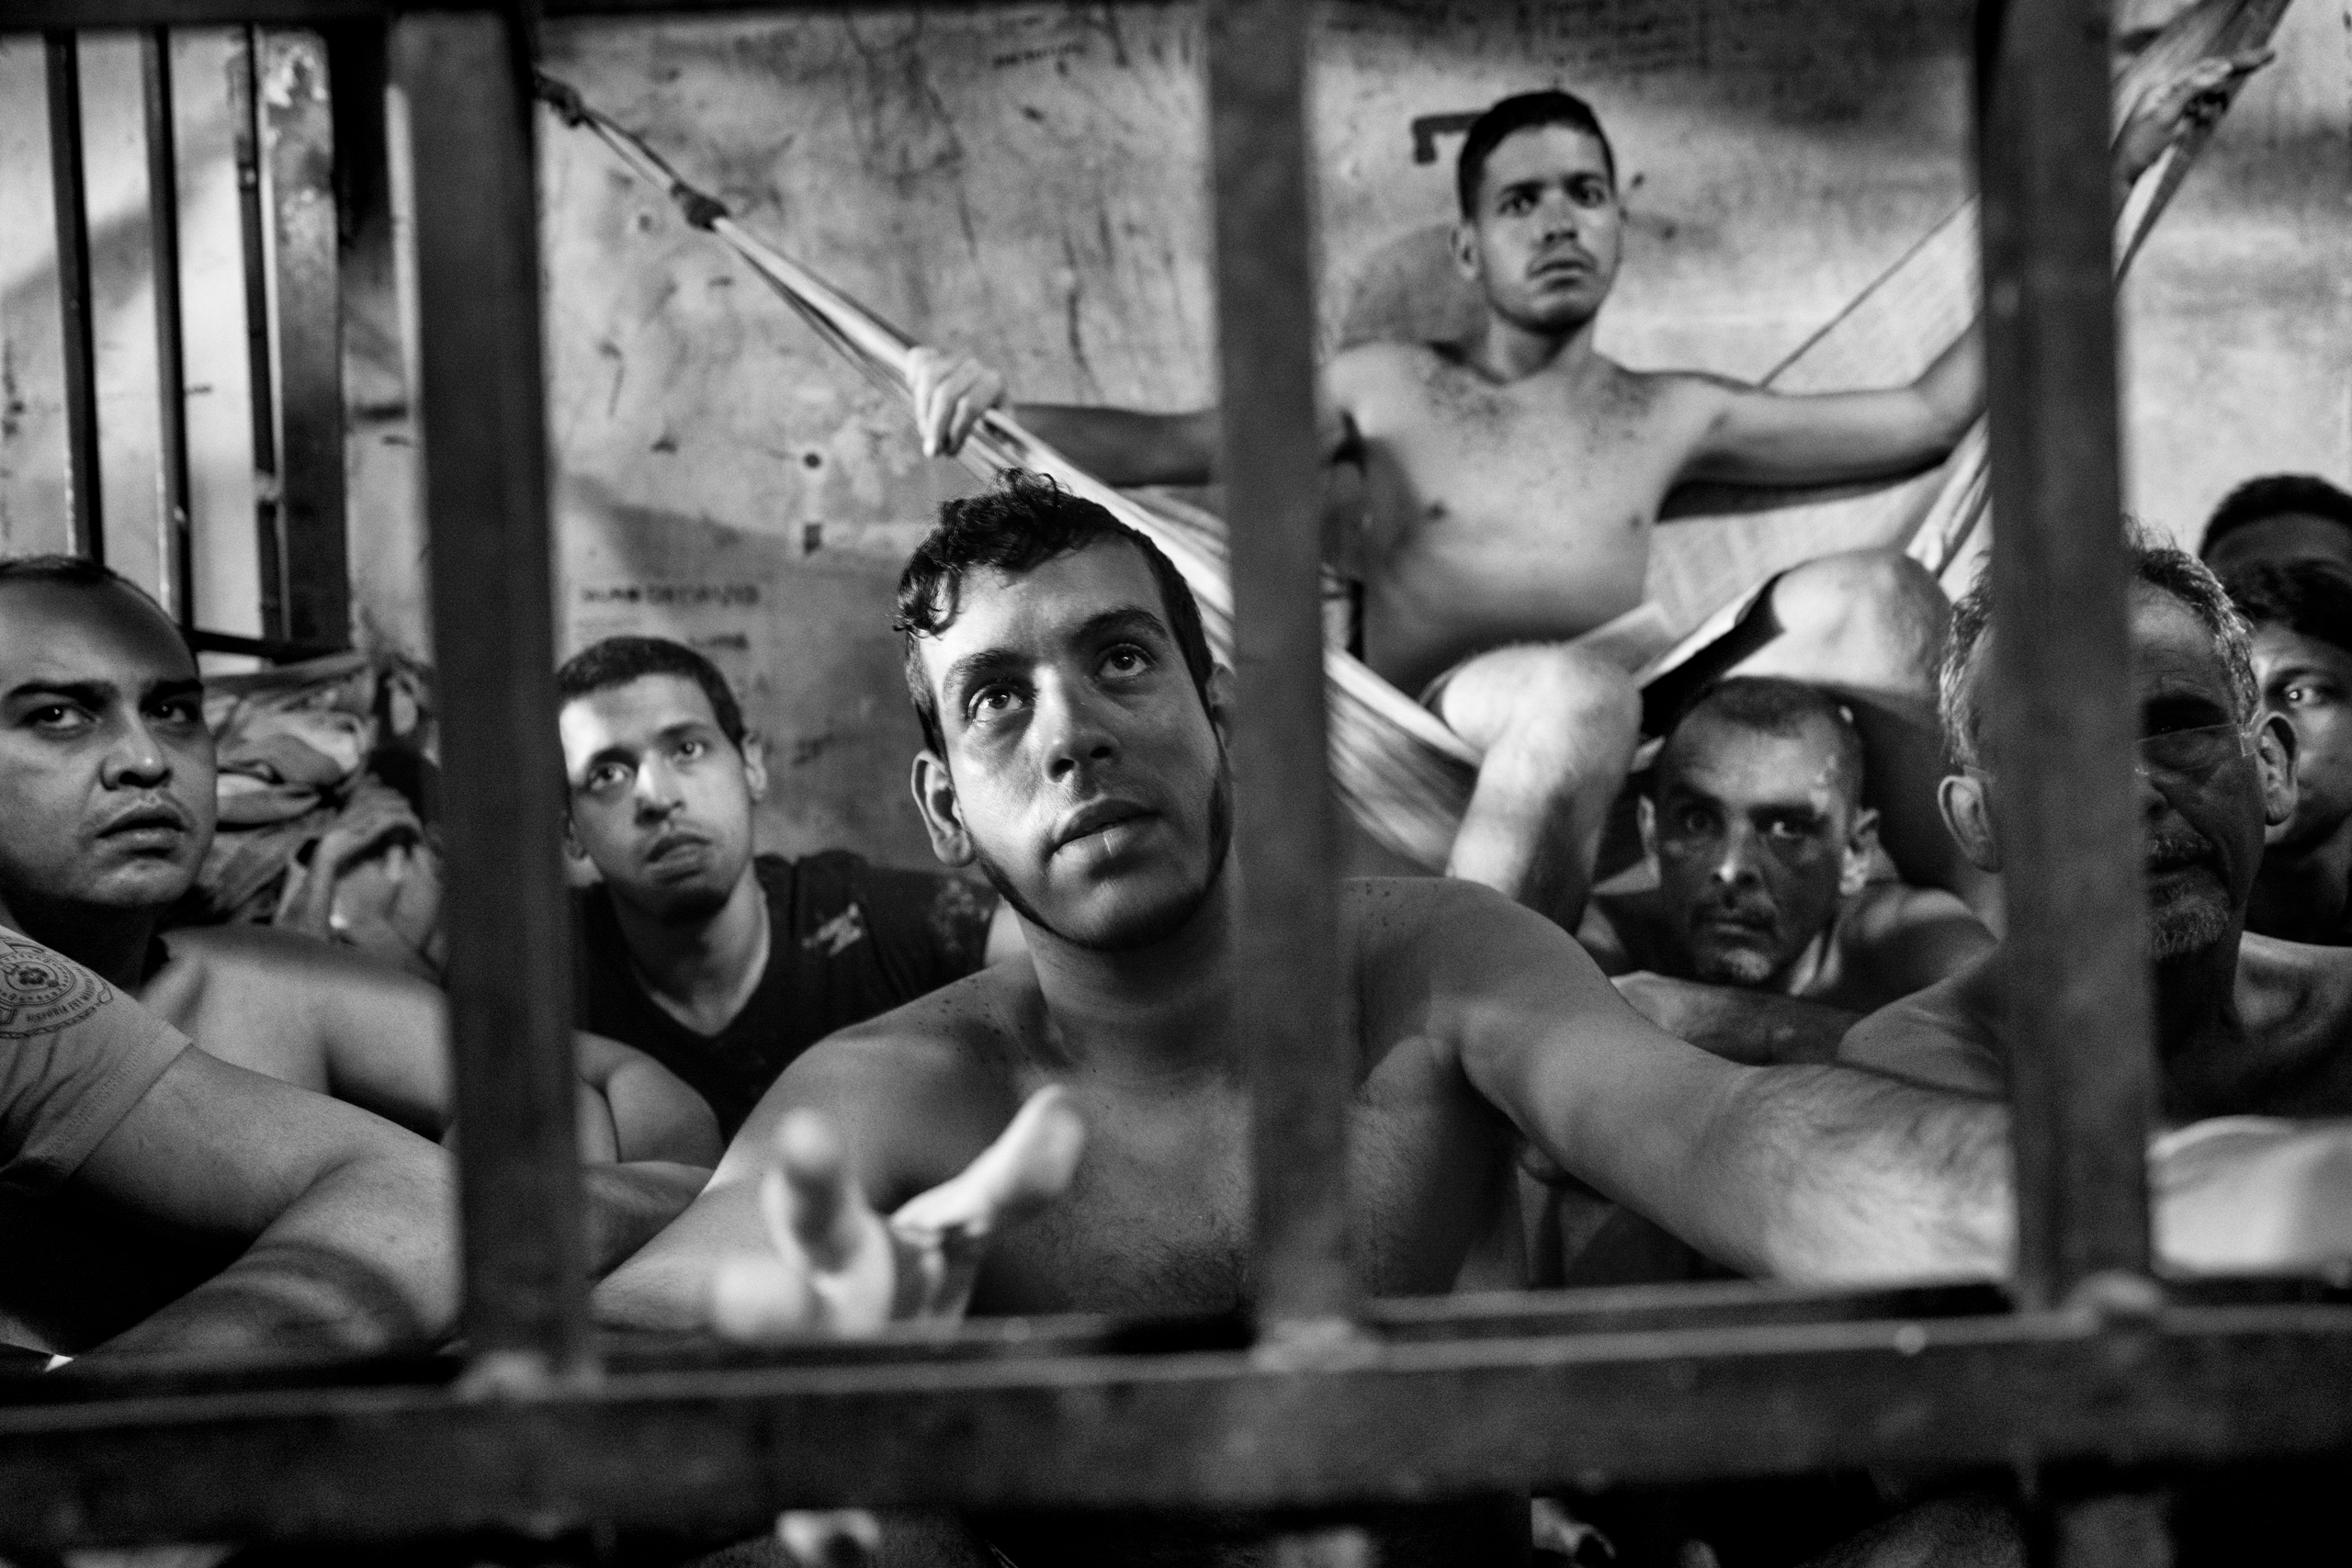 Prisoners inside a crowded cell at the Chacao municipal police station in eastern Caracas. There is no room to  sit and prisoners take turns resting on sheets tied to bars like hammocks.  Jails in Venezuela are seriously overcrowded with shortages of food and medicine. Because of the economic and political crisis, the number of prisoners grows daily as more Venezuelans are arrested for crimes, including mugging, kidnapping and murder, June 2016.